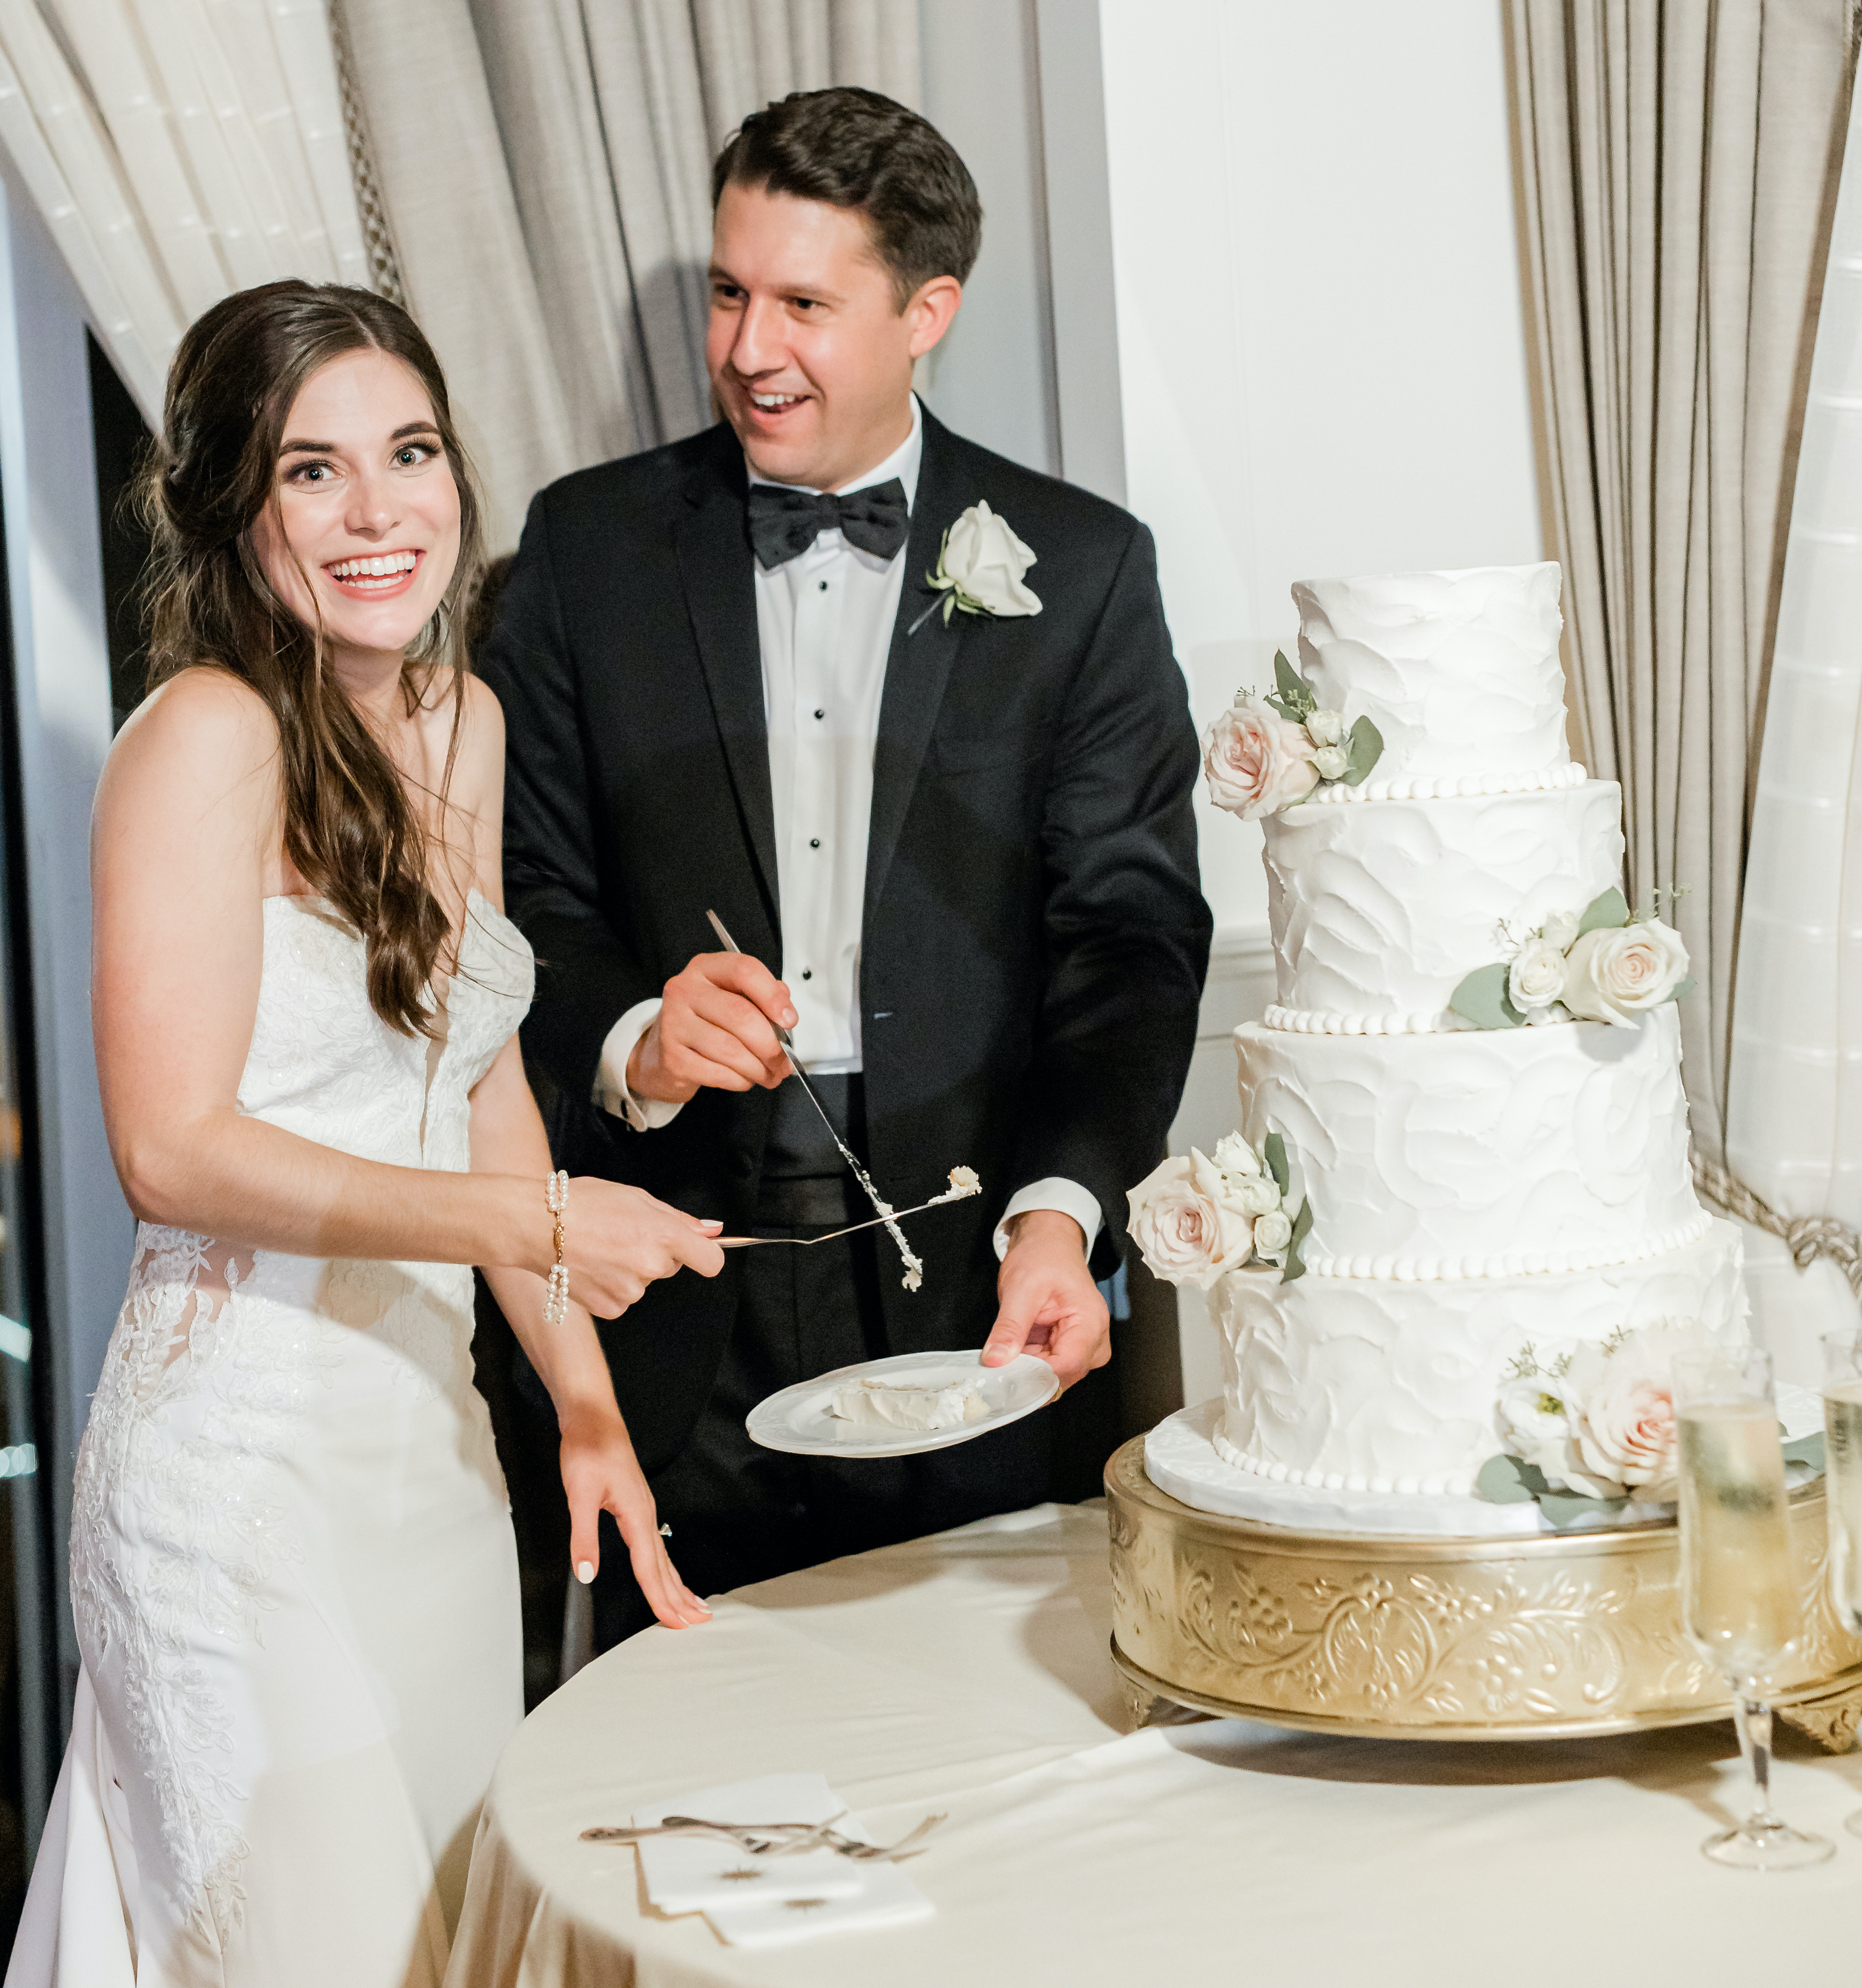 A bride and groom cut their four-tier wedding cake at their reception at The Petroleum Club in Houston.